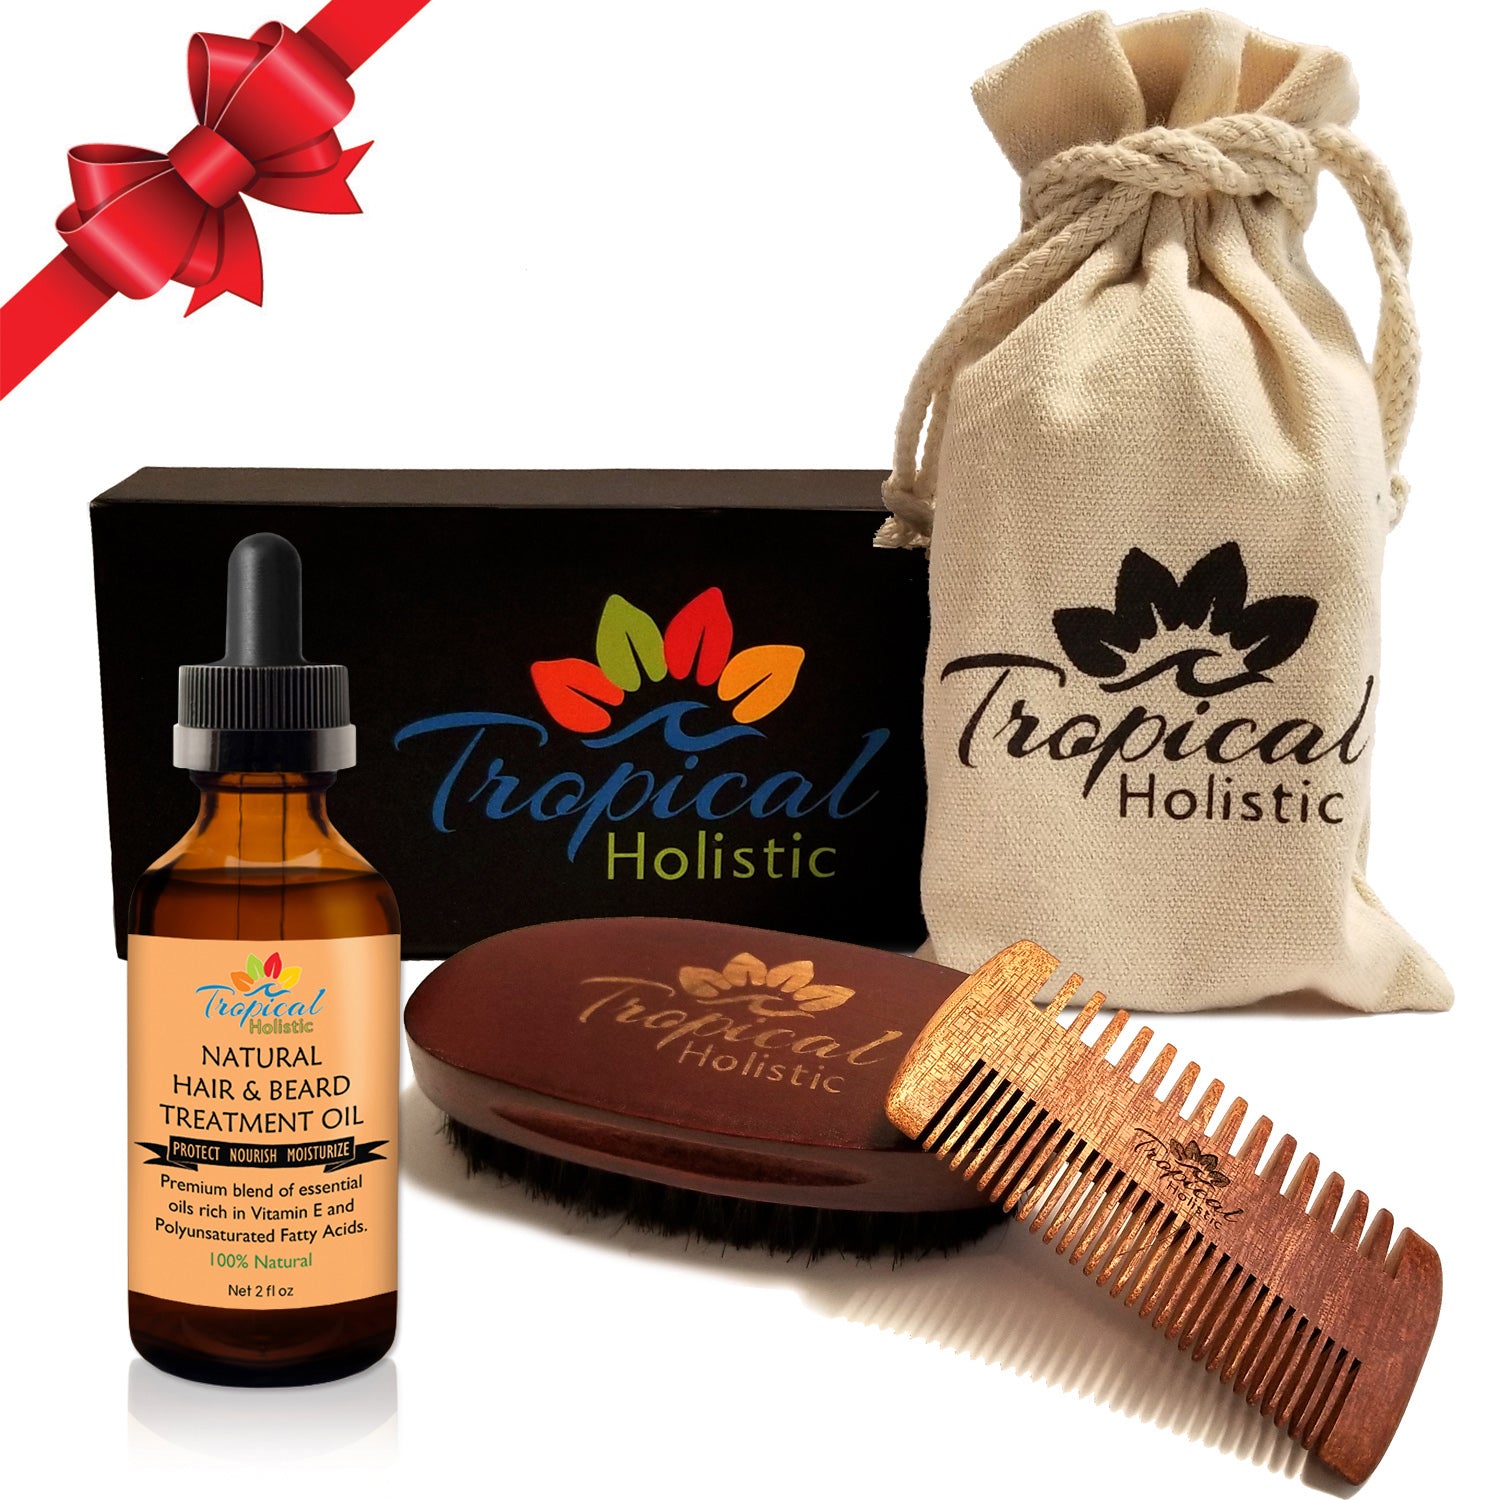 Premium Men's Beard Kit with Quality Brush, Comb, 100% Natural Organic Beard Oil 2oz, and Deluxe Cotton Bag in Gift Box. - Tropical-Holistic